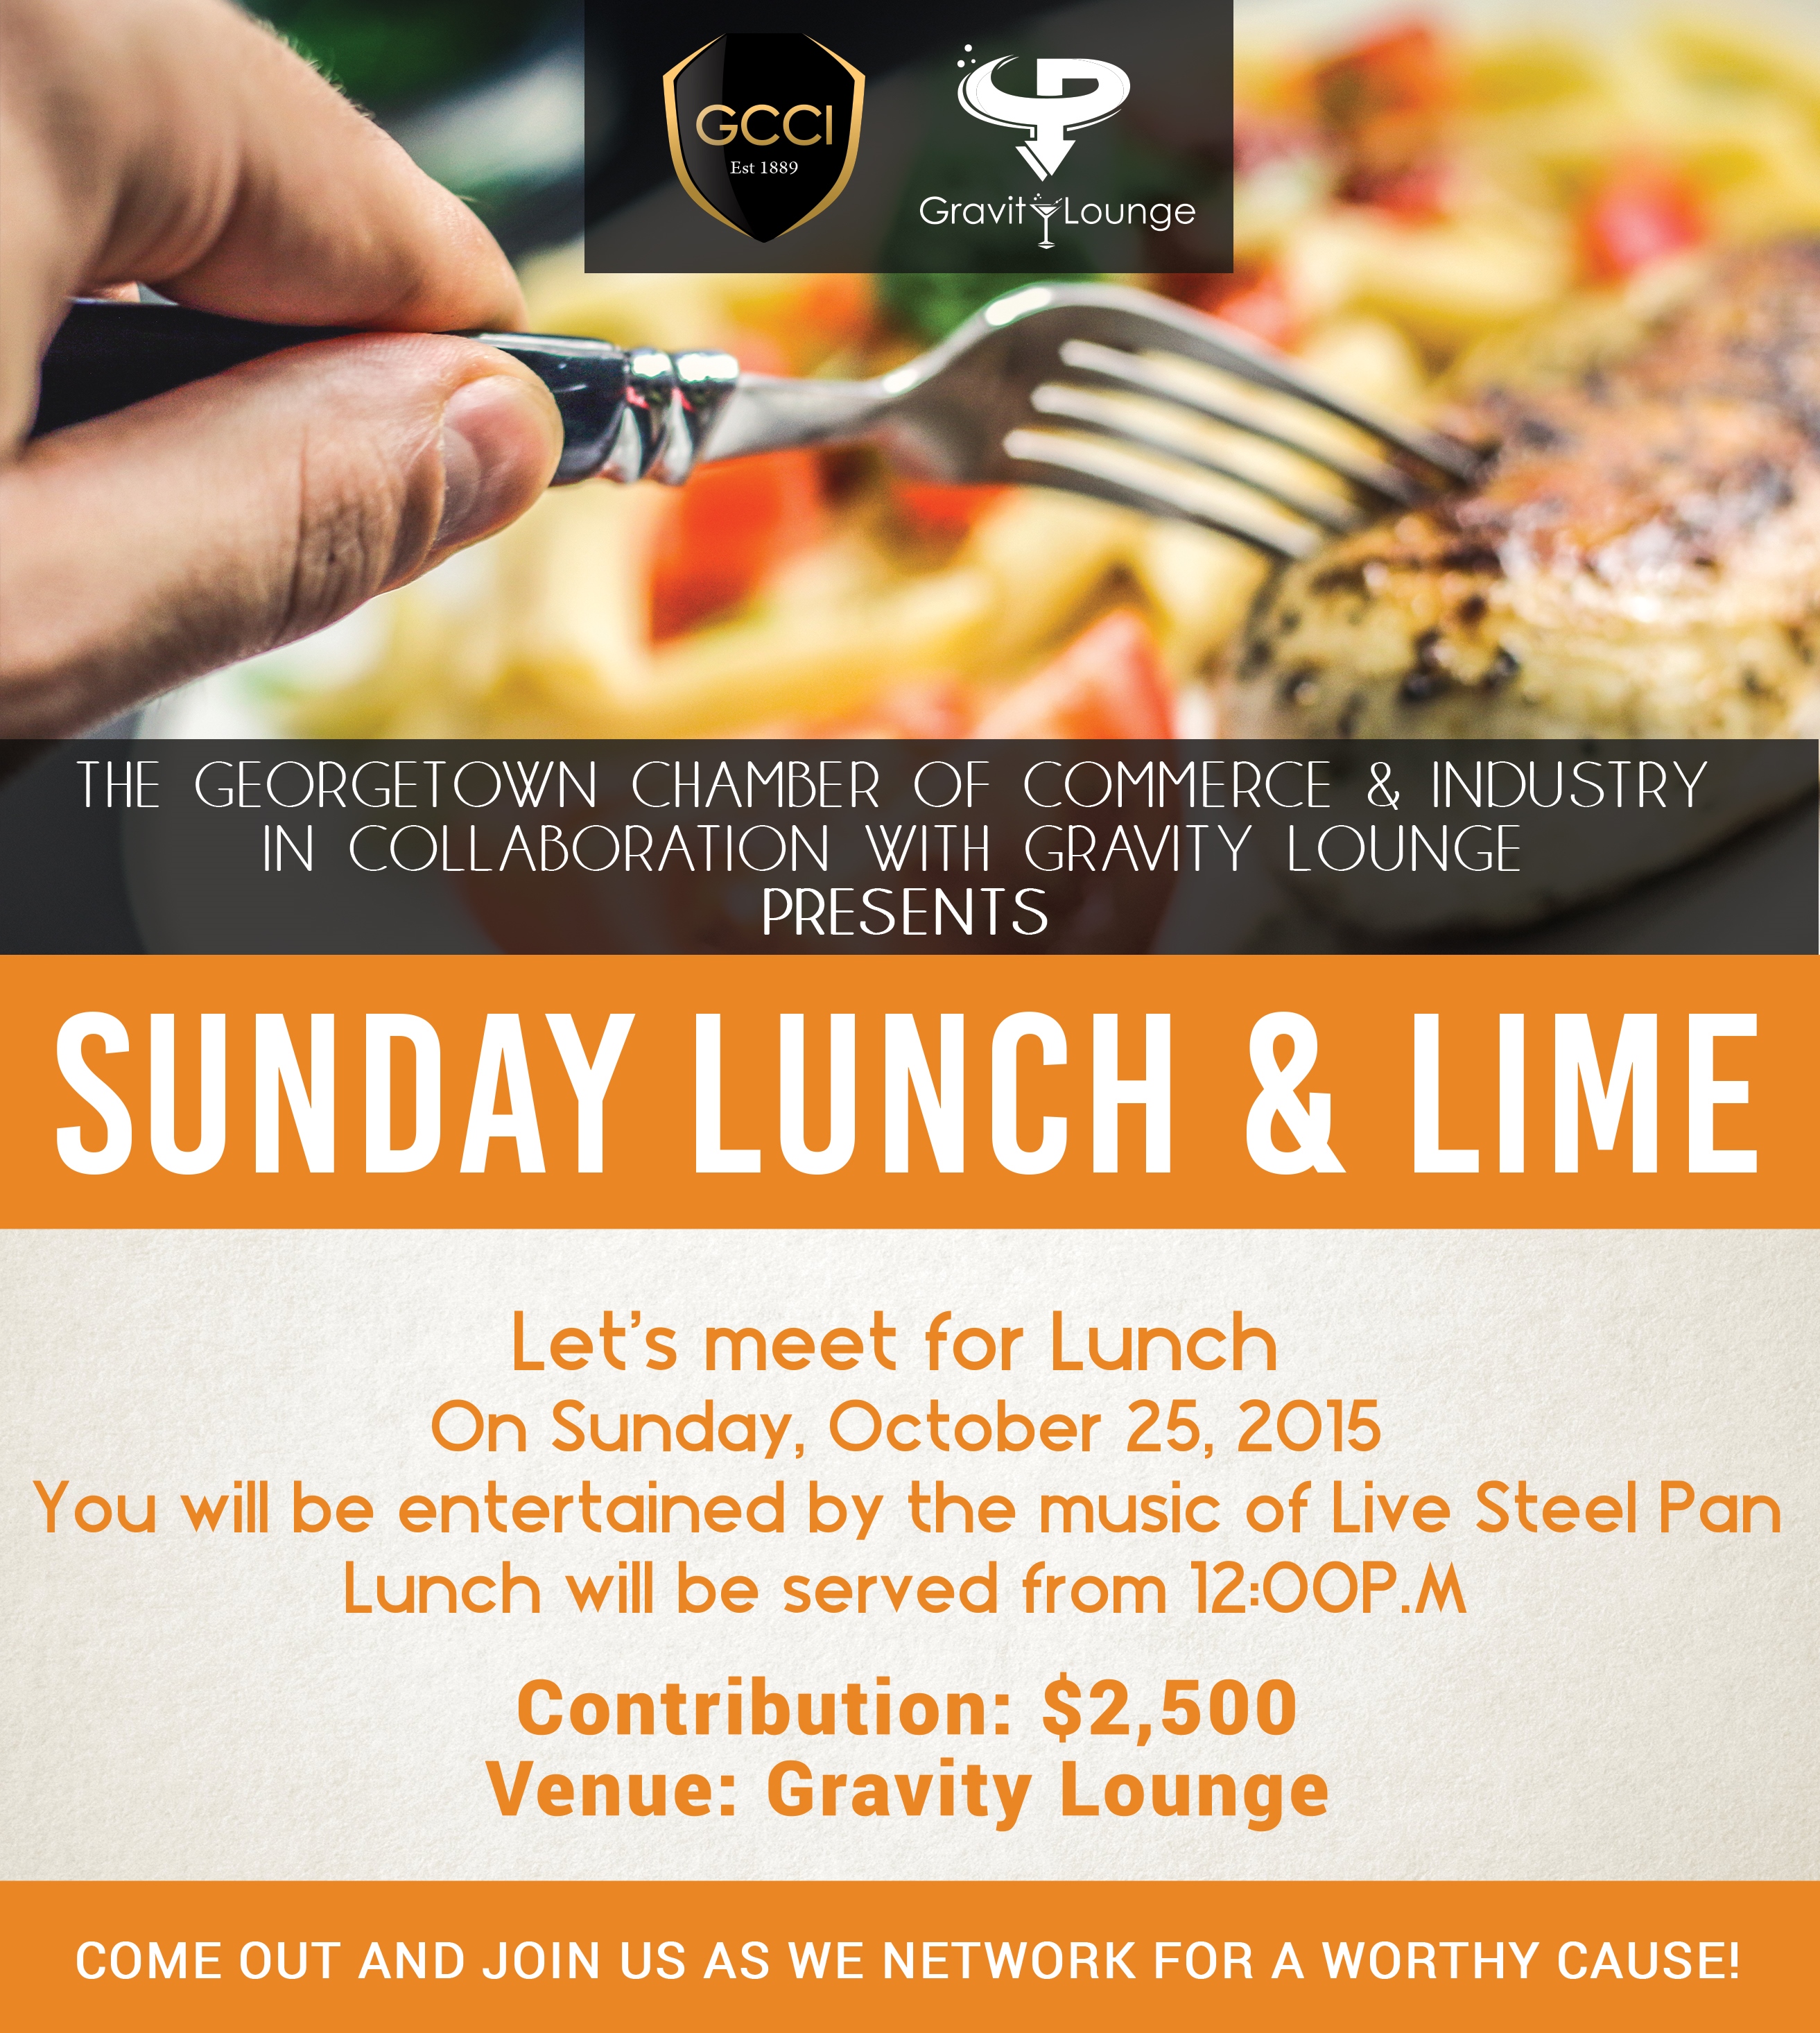 GCCI in collaboration with Gravity Lounge presents Sunday Lunch and Lime- October 25, 2015